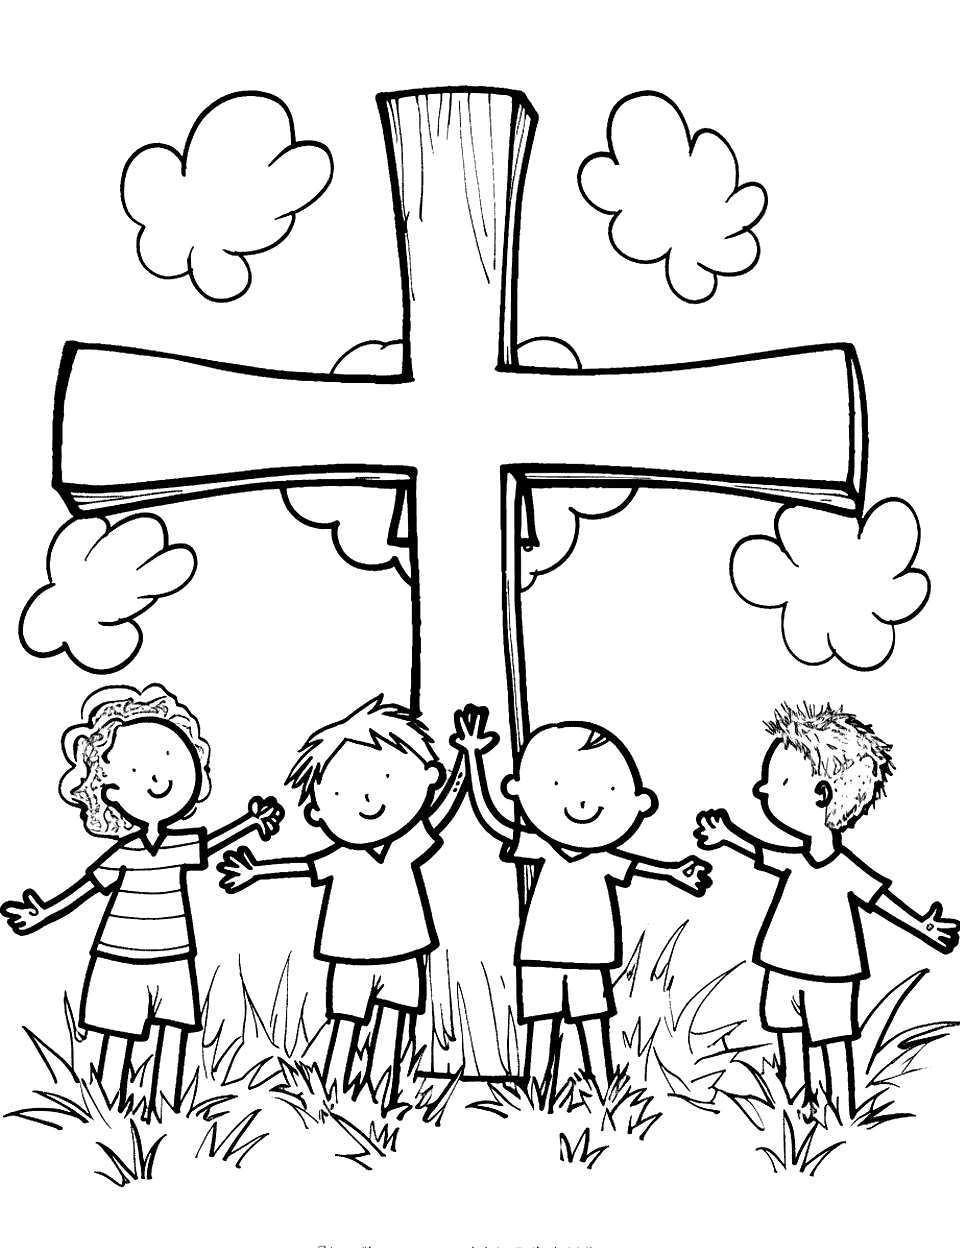 Children Around a Cross Coloring Page - Several children standing in front of the cross on a cloudy day.